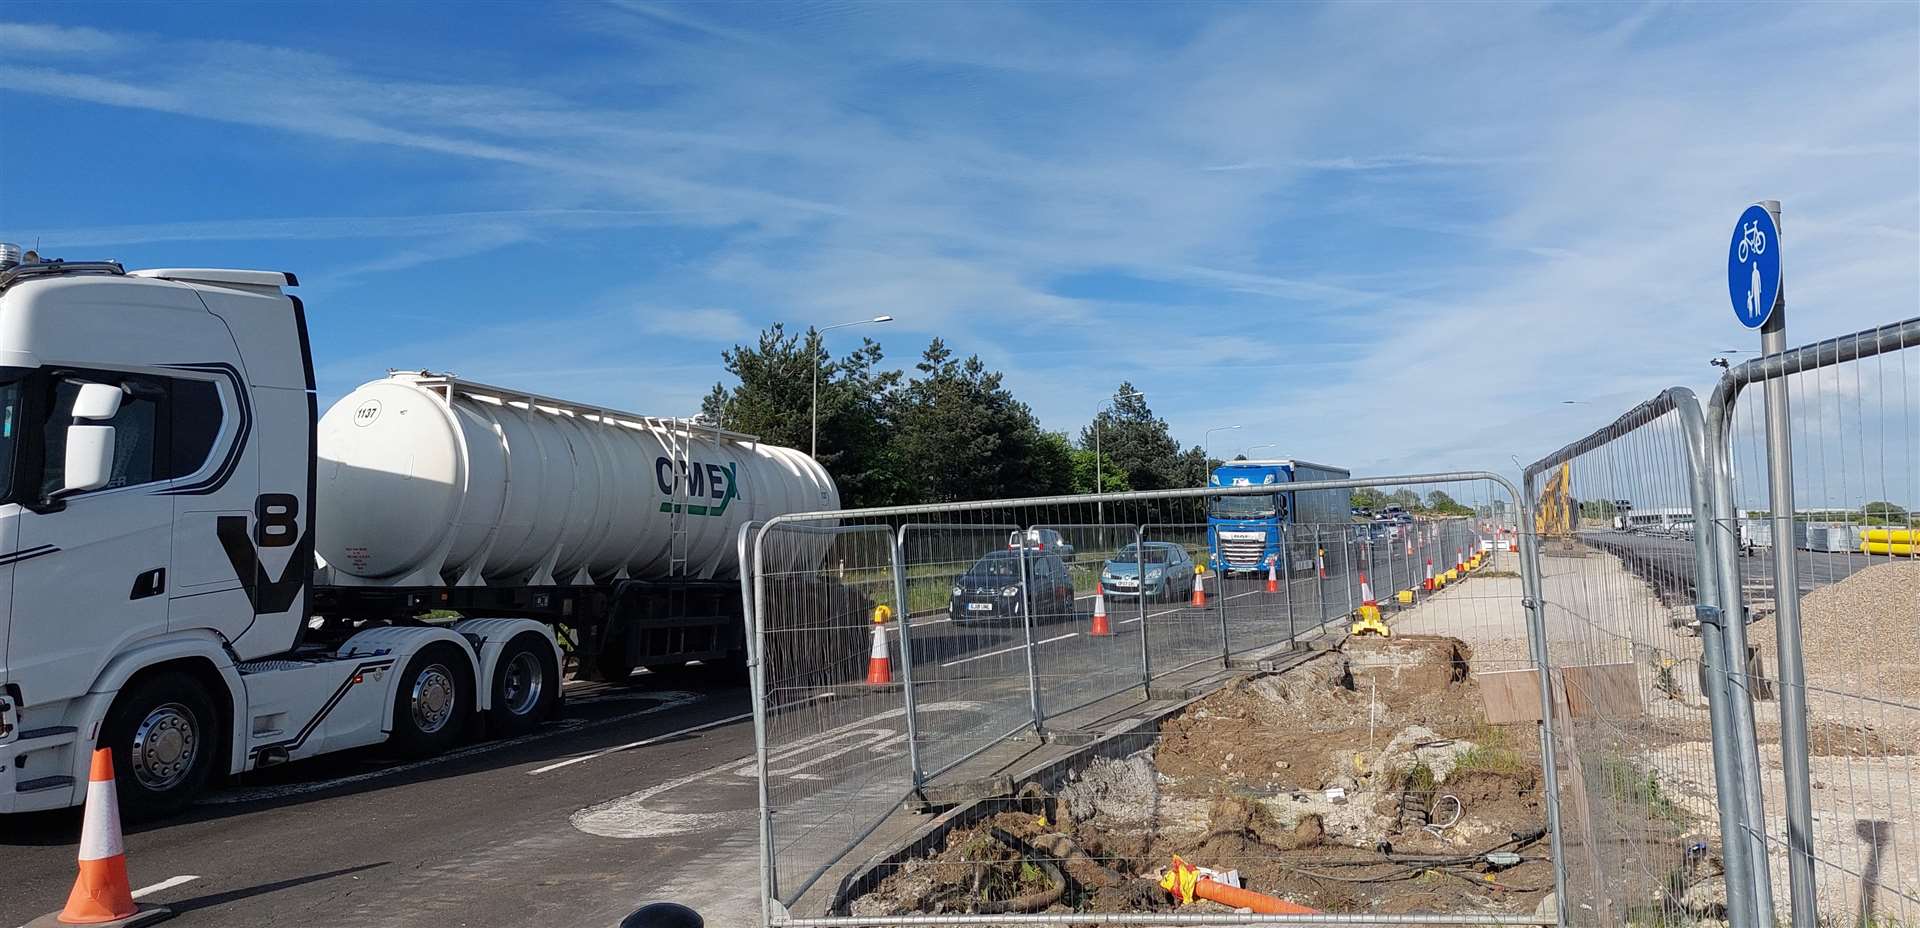 Drivers will face six weeks of lane closures on the A2070